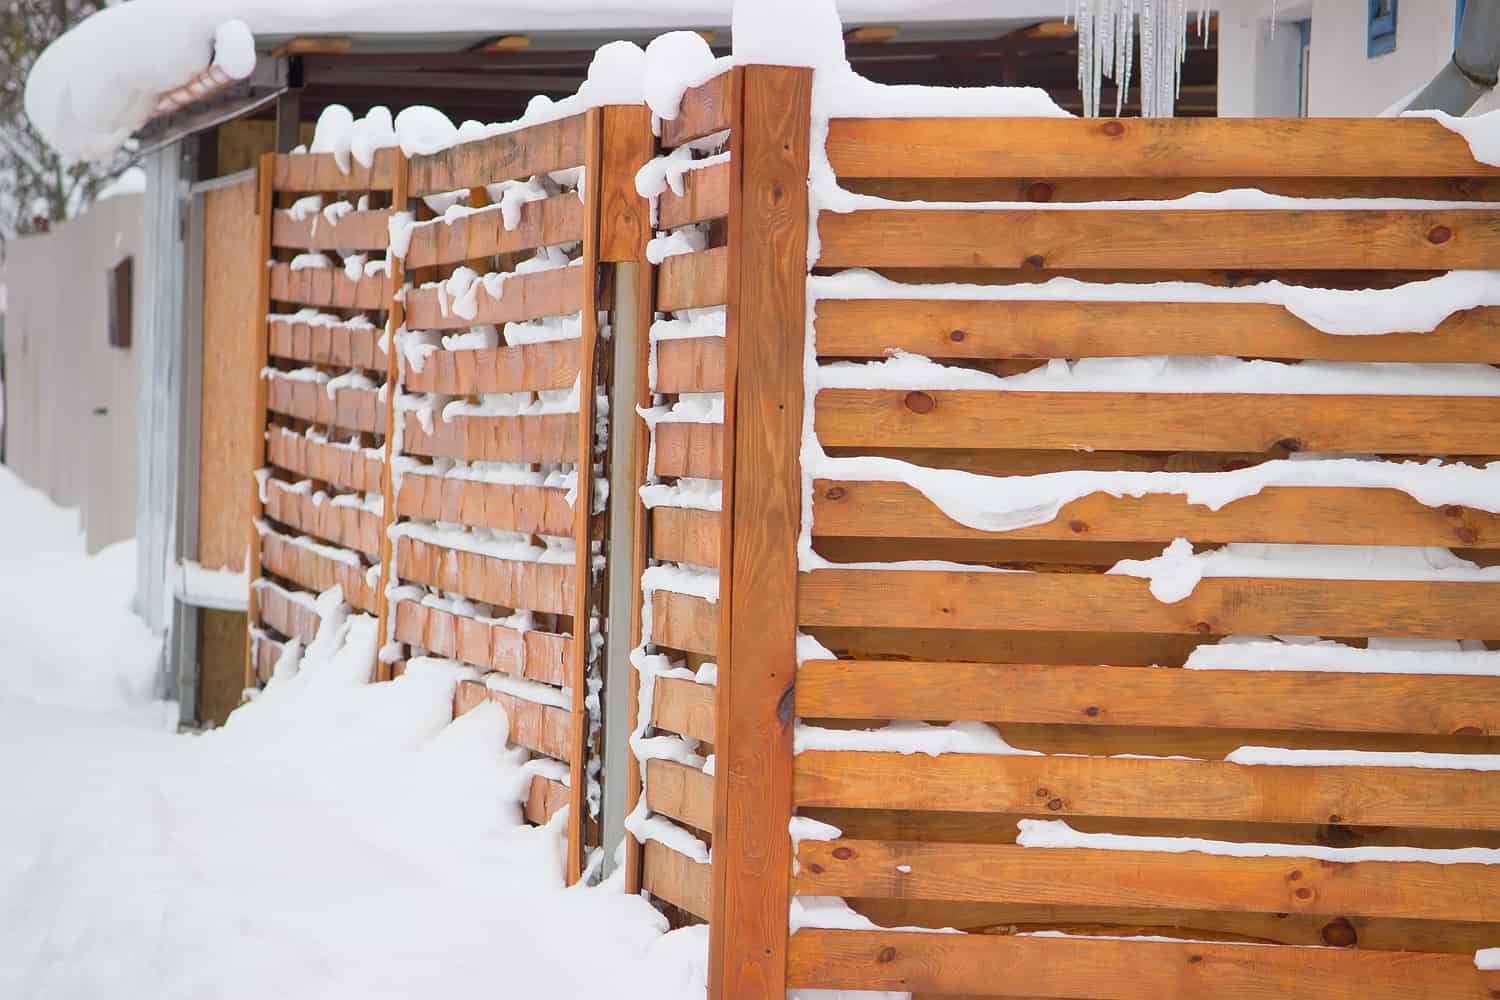 wooden fence in the snow at white background

